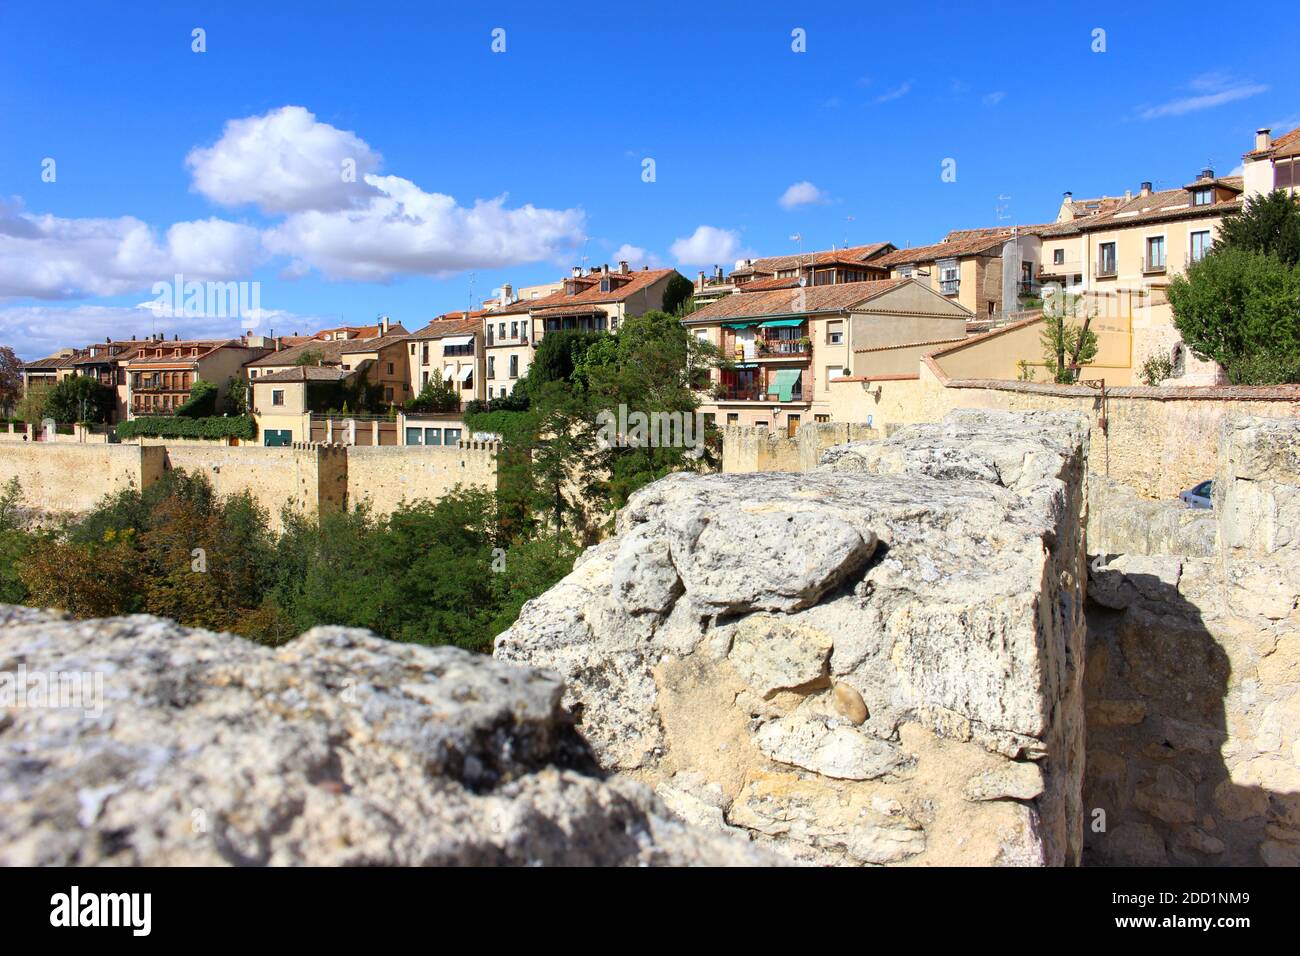 Segovia, view from the city walls Stock Photo